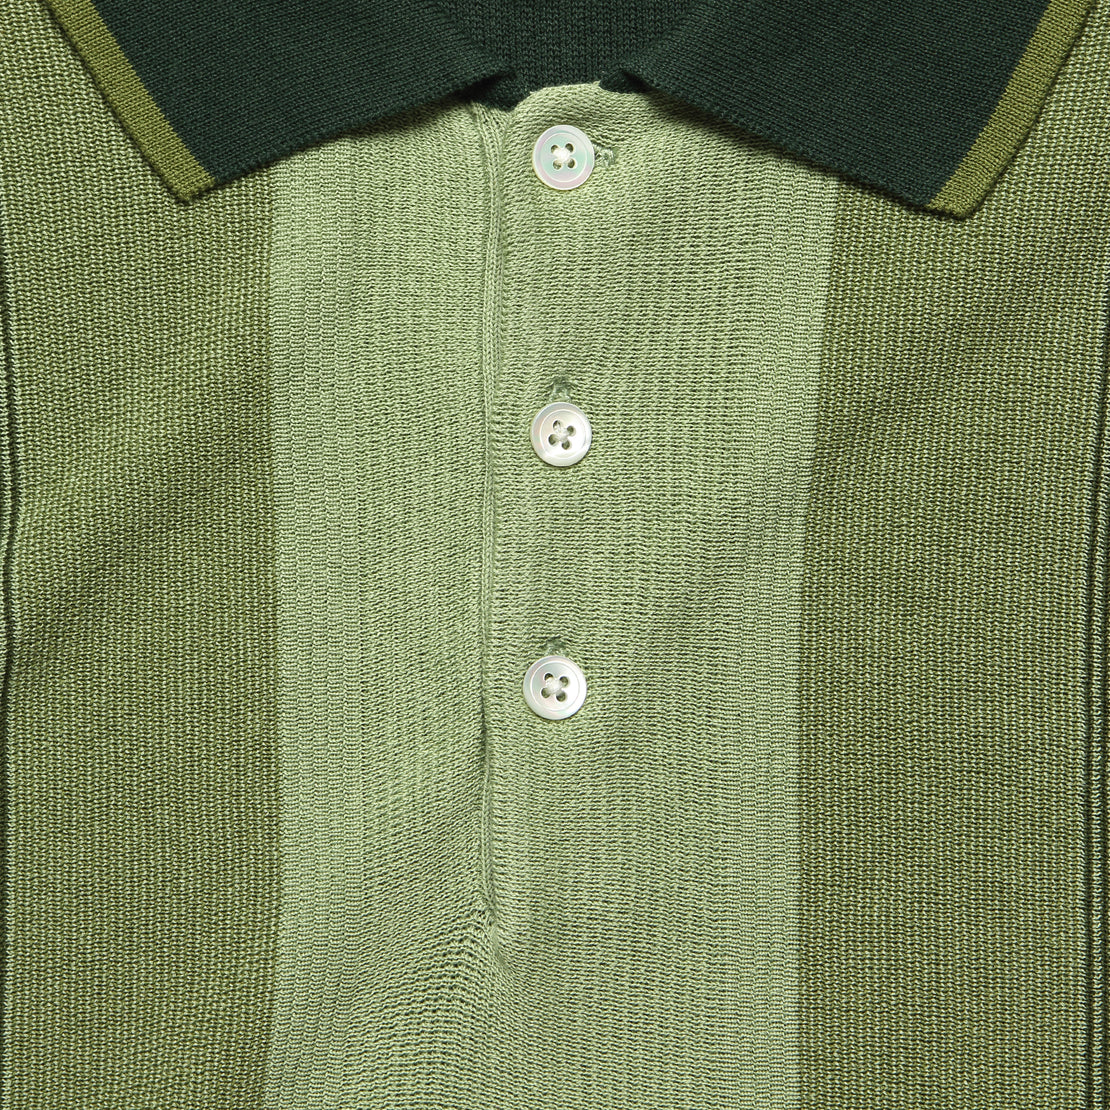 Knit Polo - Green Stripe - BEAMS+ - STAG Provisions - Tops - S/S Knit